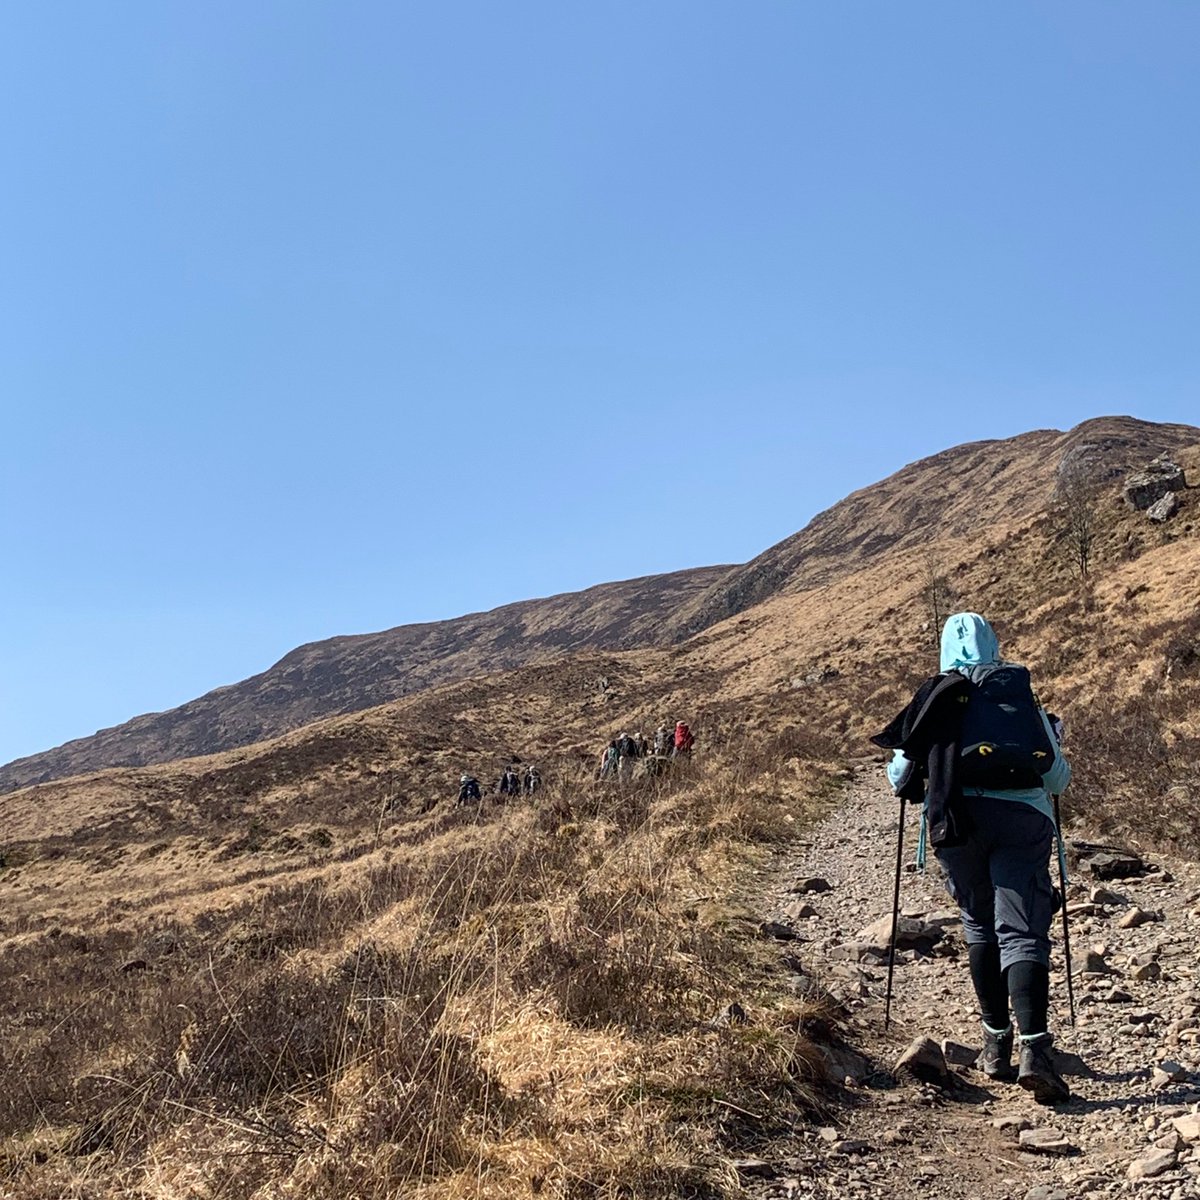 Today is the start of #NationalWalkingMonth. Not everyone can manage the whole #WestHighlandWay but #walking has many health benefits helping us feel more connected to nature & less isolated. Start with short distances & who knows where you might end up?

#MagicofWalking